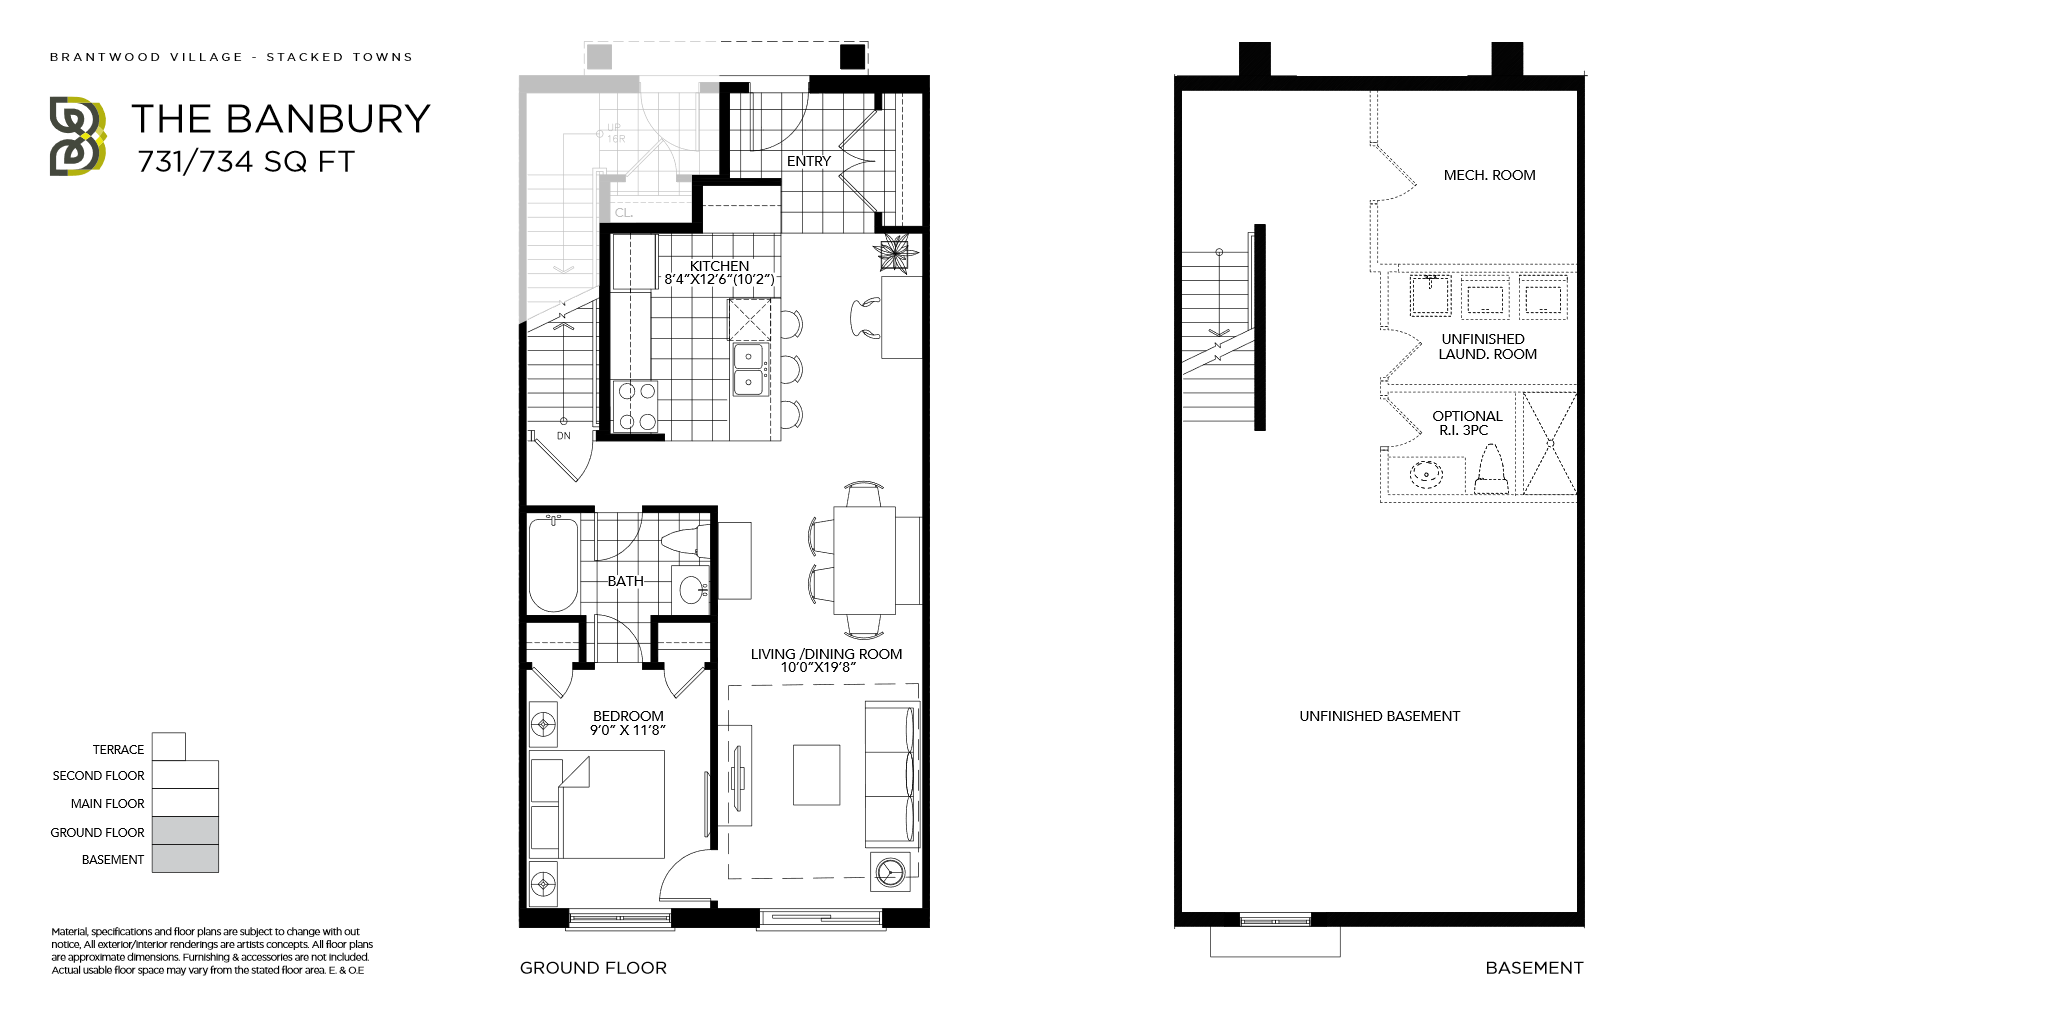 Banbury Floor Plan of Brantwood Village Towns with undefined beds